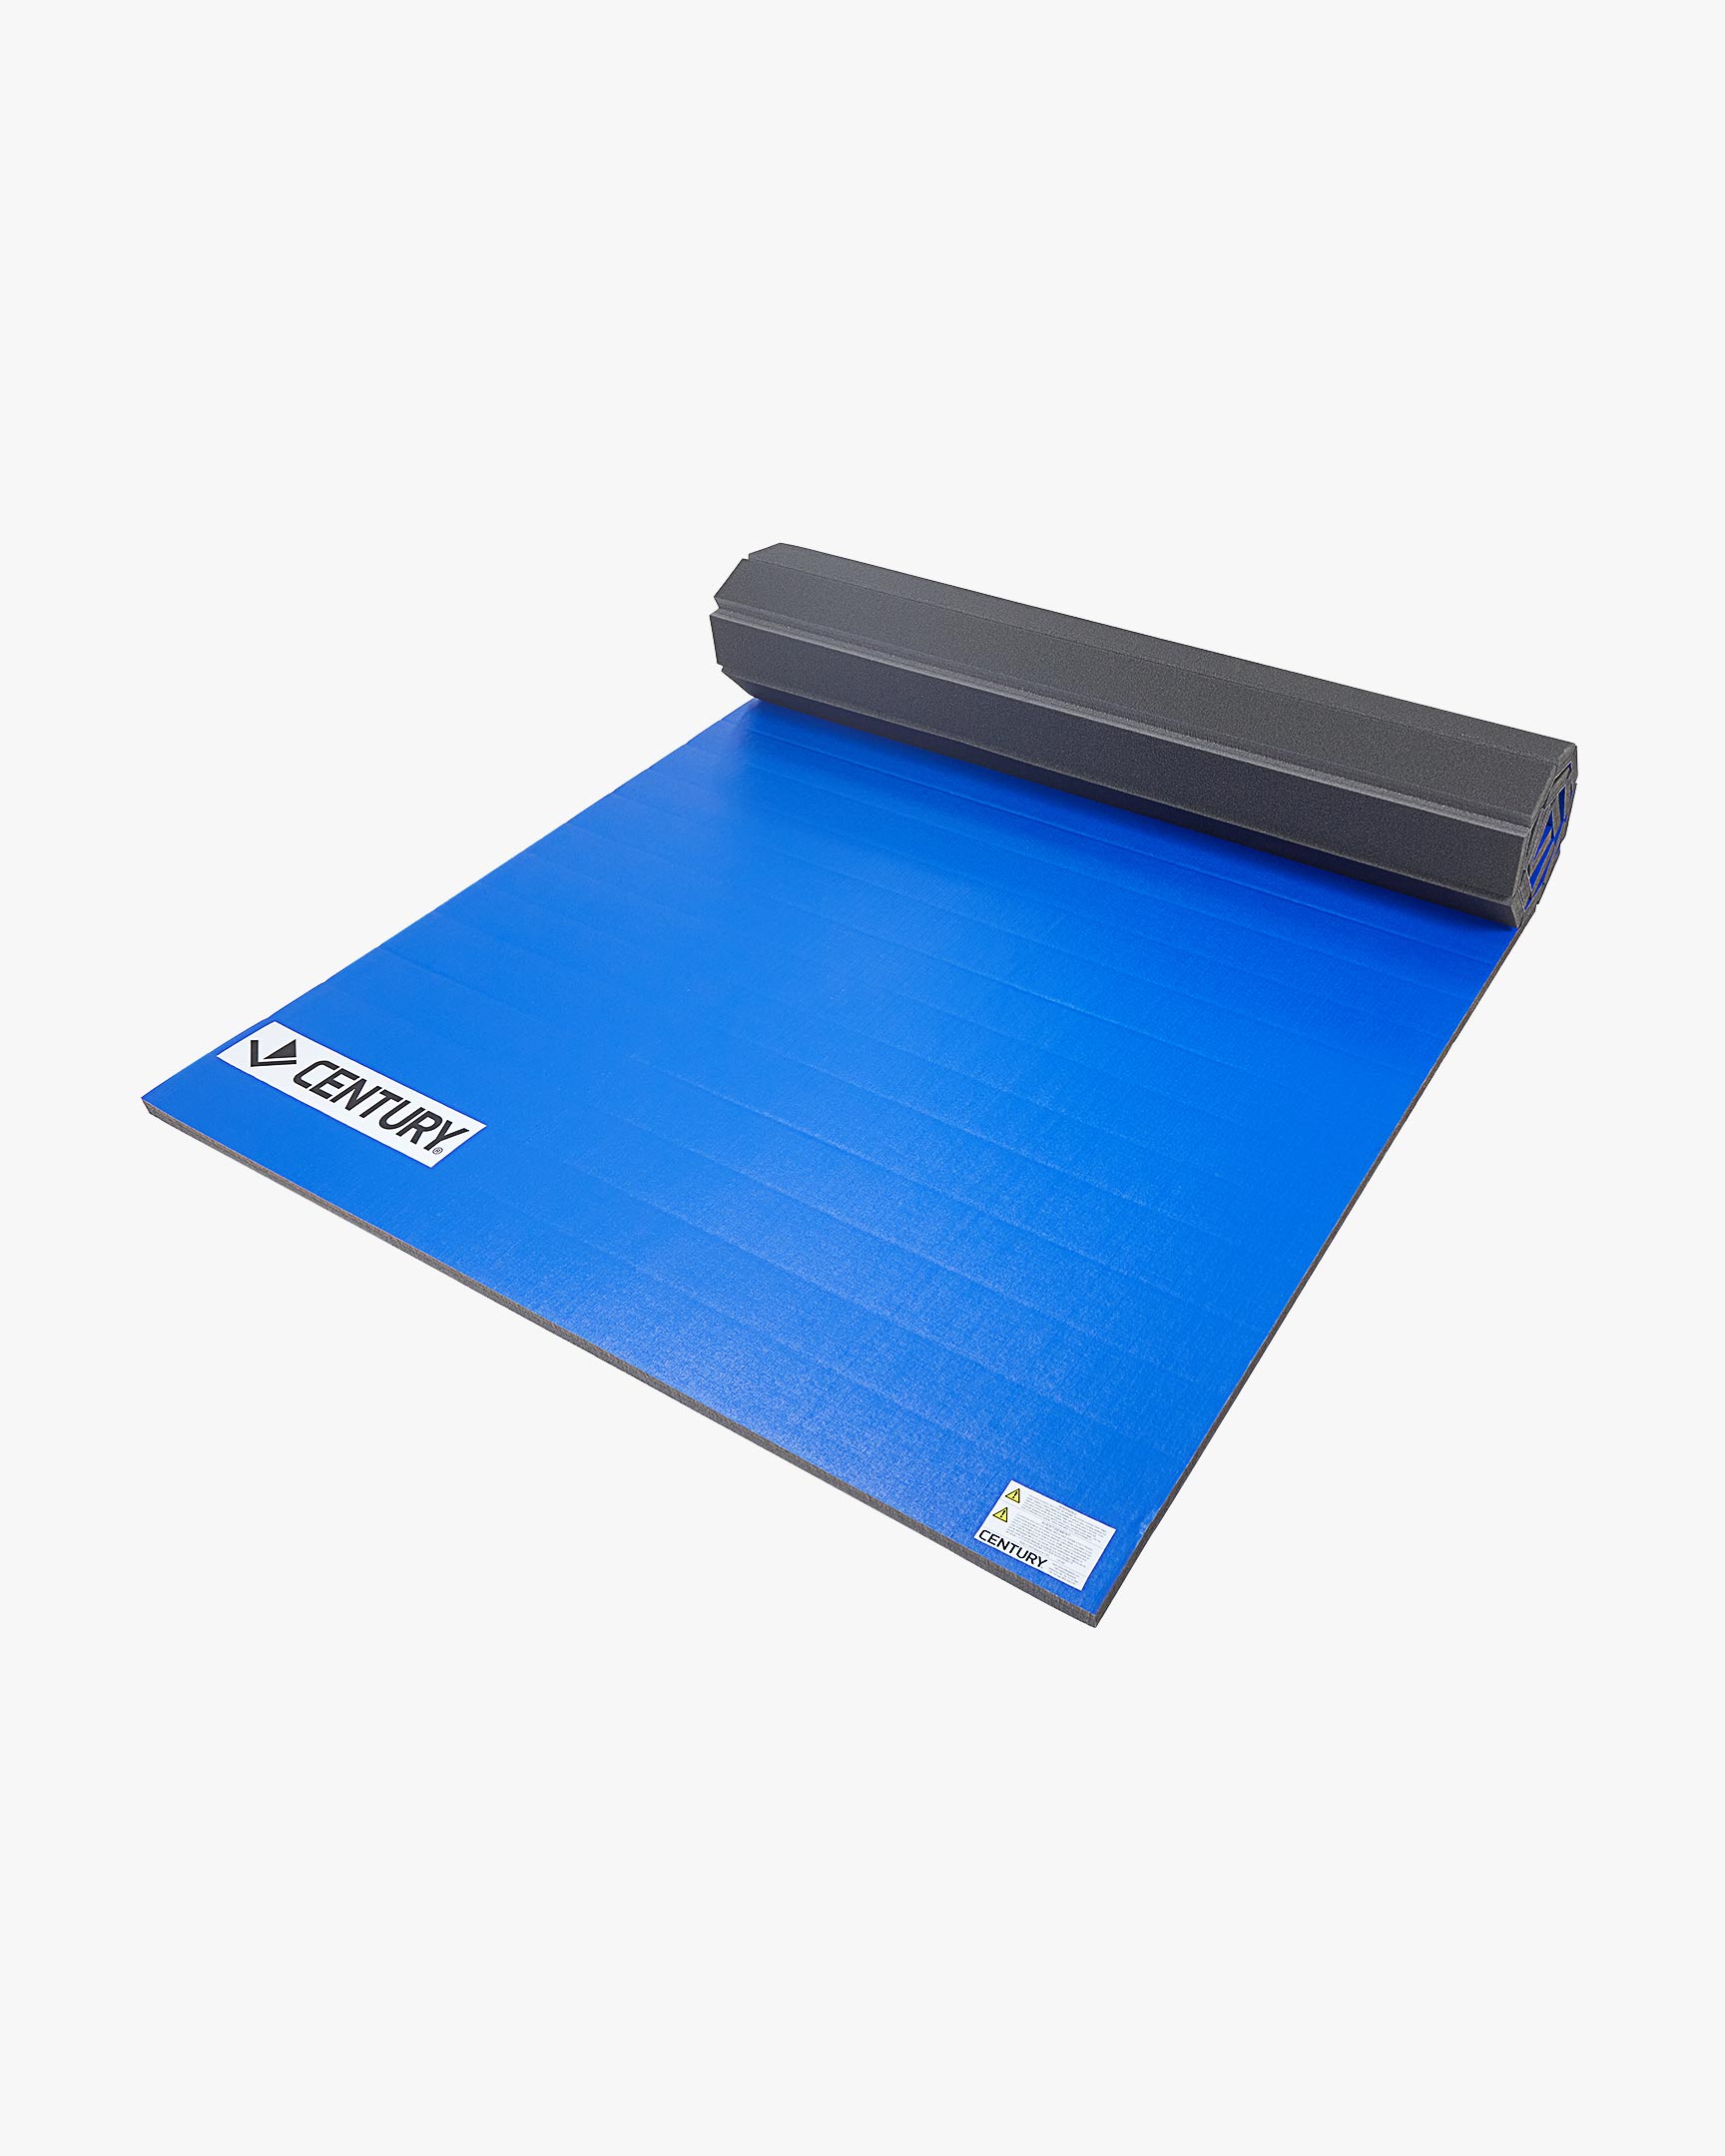 Home Tatami Rollout Mat - 5' x 10' x 1.25" Thick Royal Blue